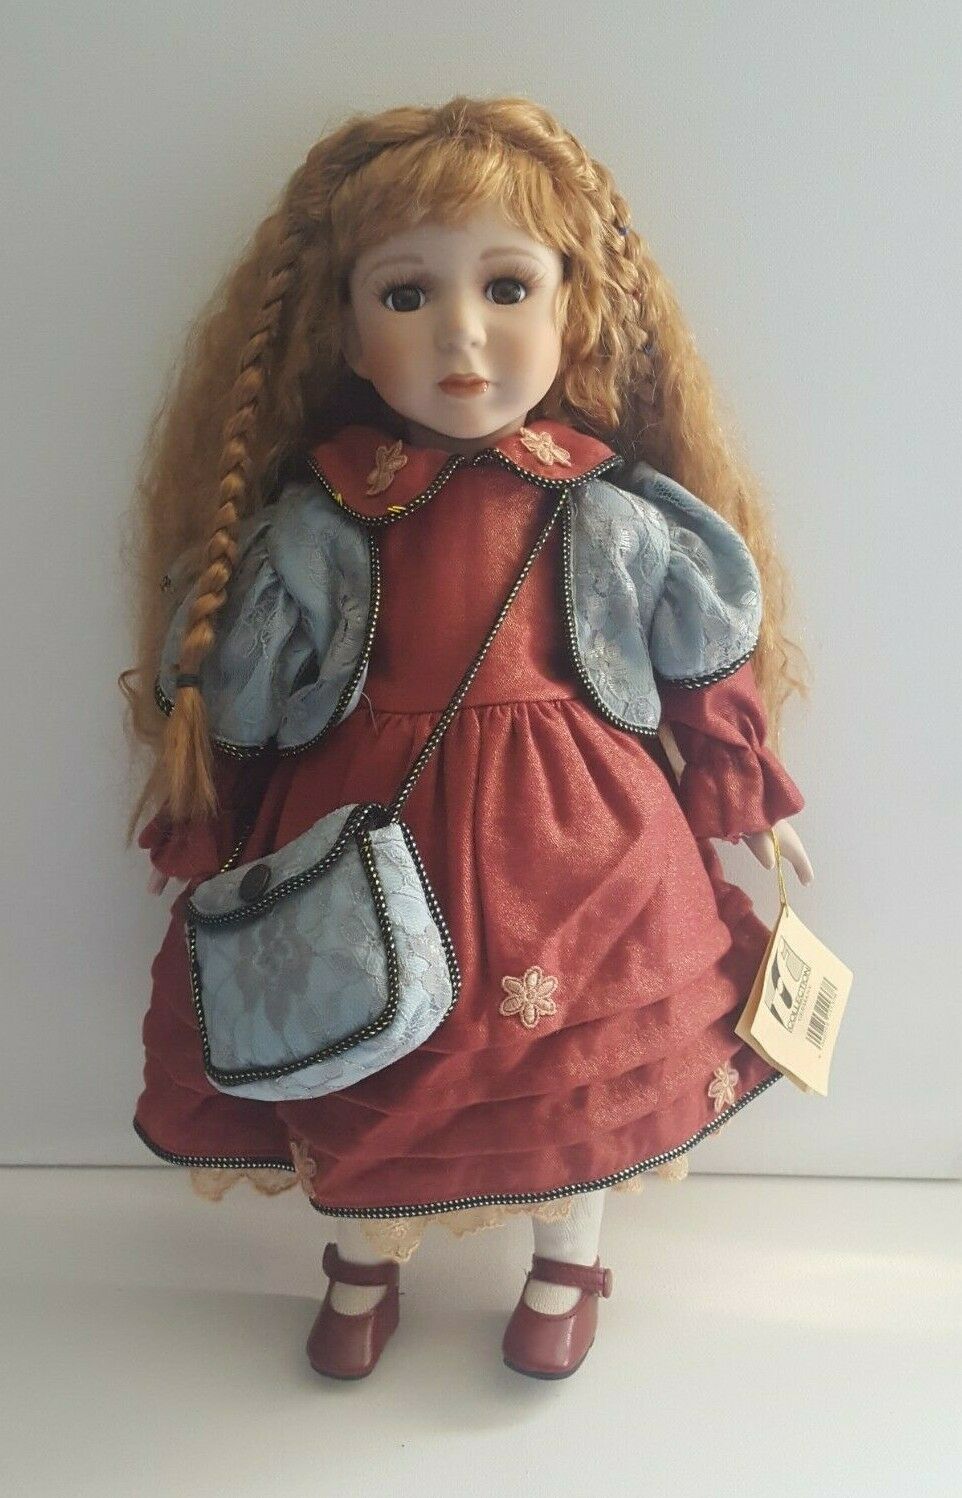 Rf Collection 16 Inch Porcelain Doll With All Handmade Clothing And Accessories